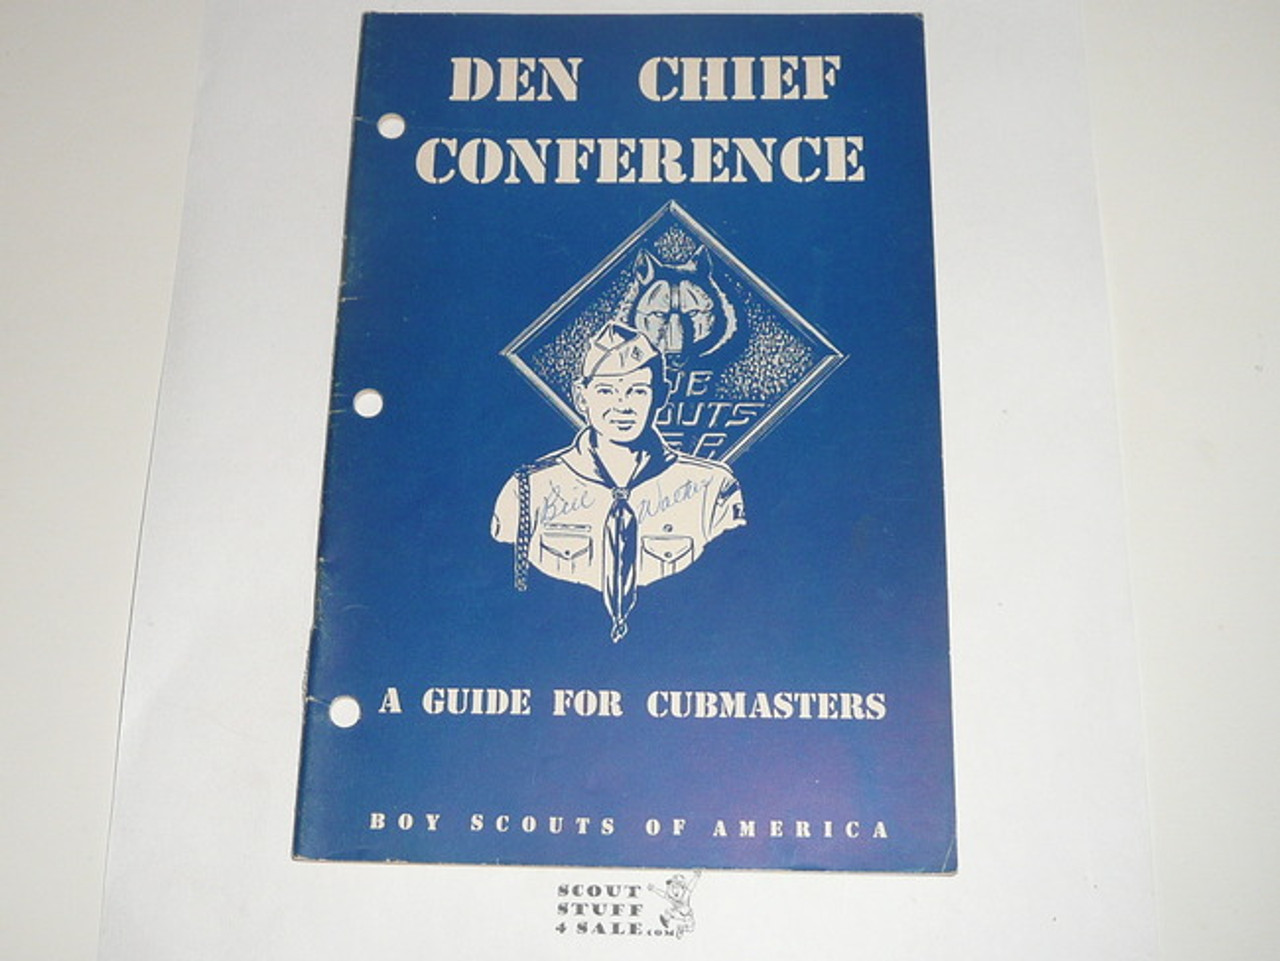 Den Chief Conference, A guide for Cubmasters, 9-56 printing